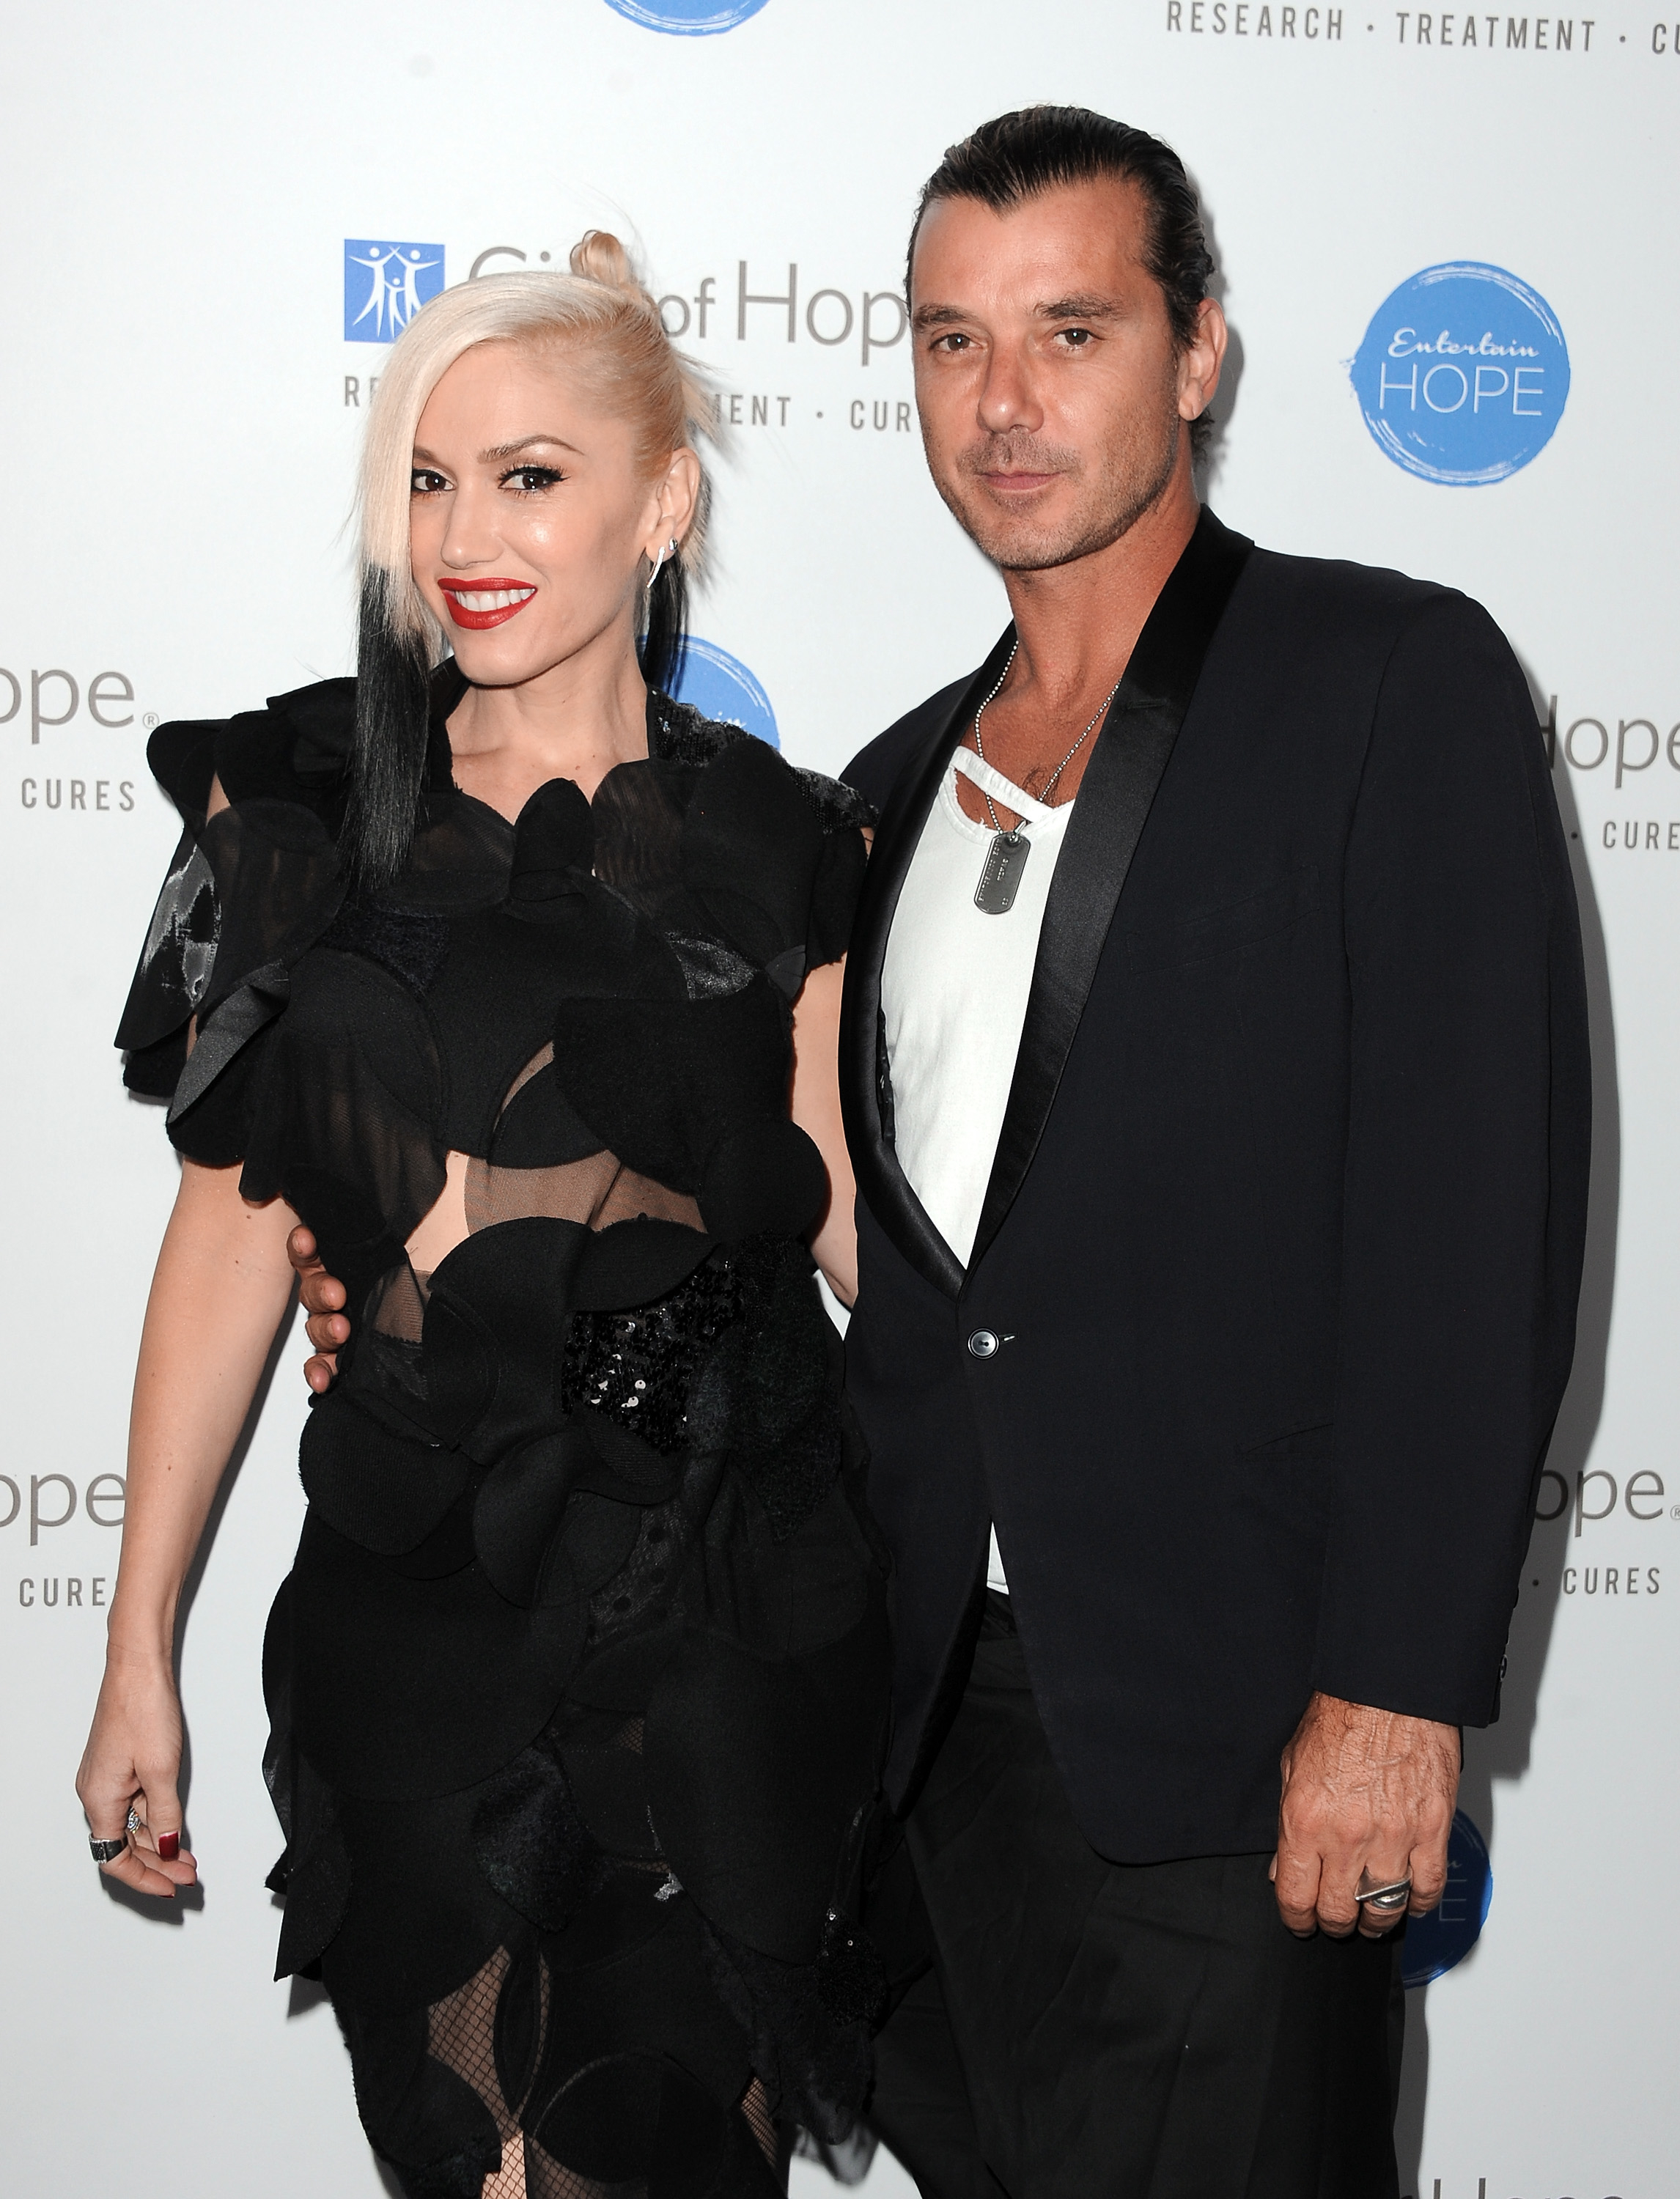 Gwen in a ruffled outfit, and Gavin in a dark suit with a light shirt, at a media event